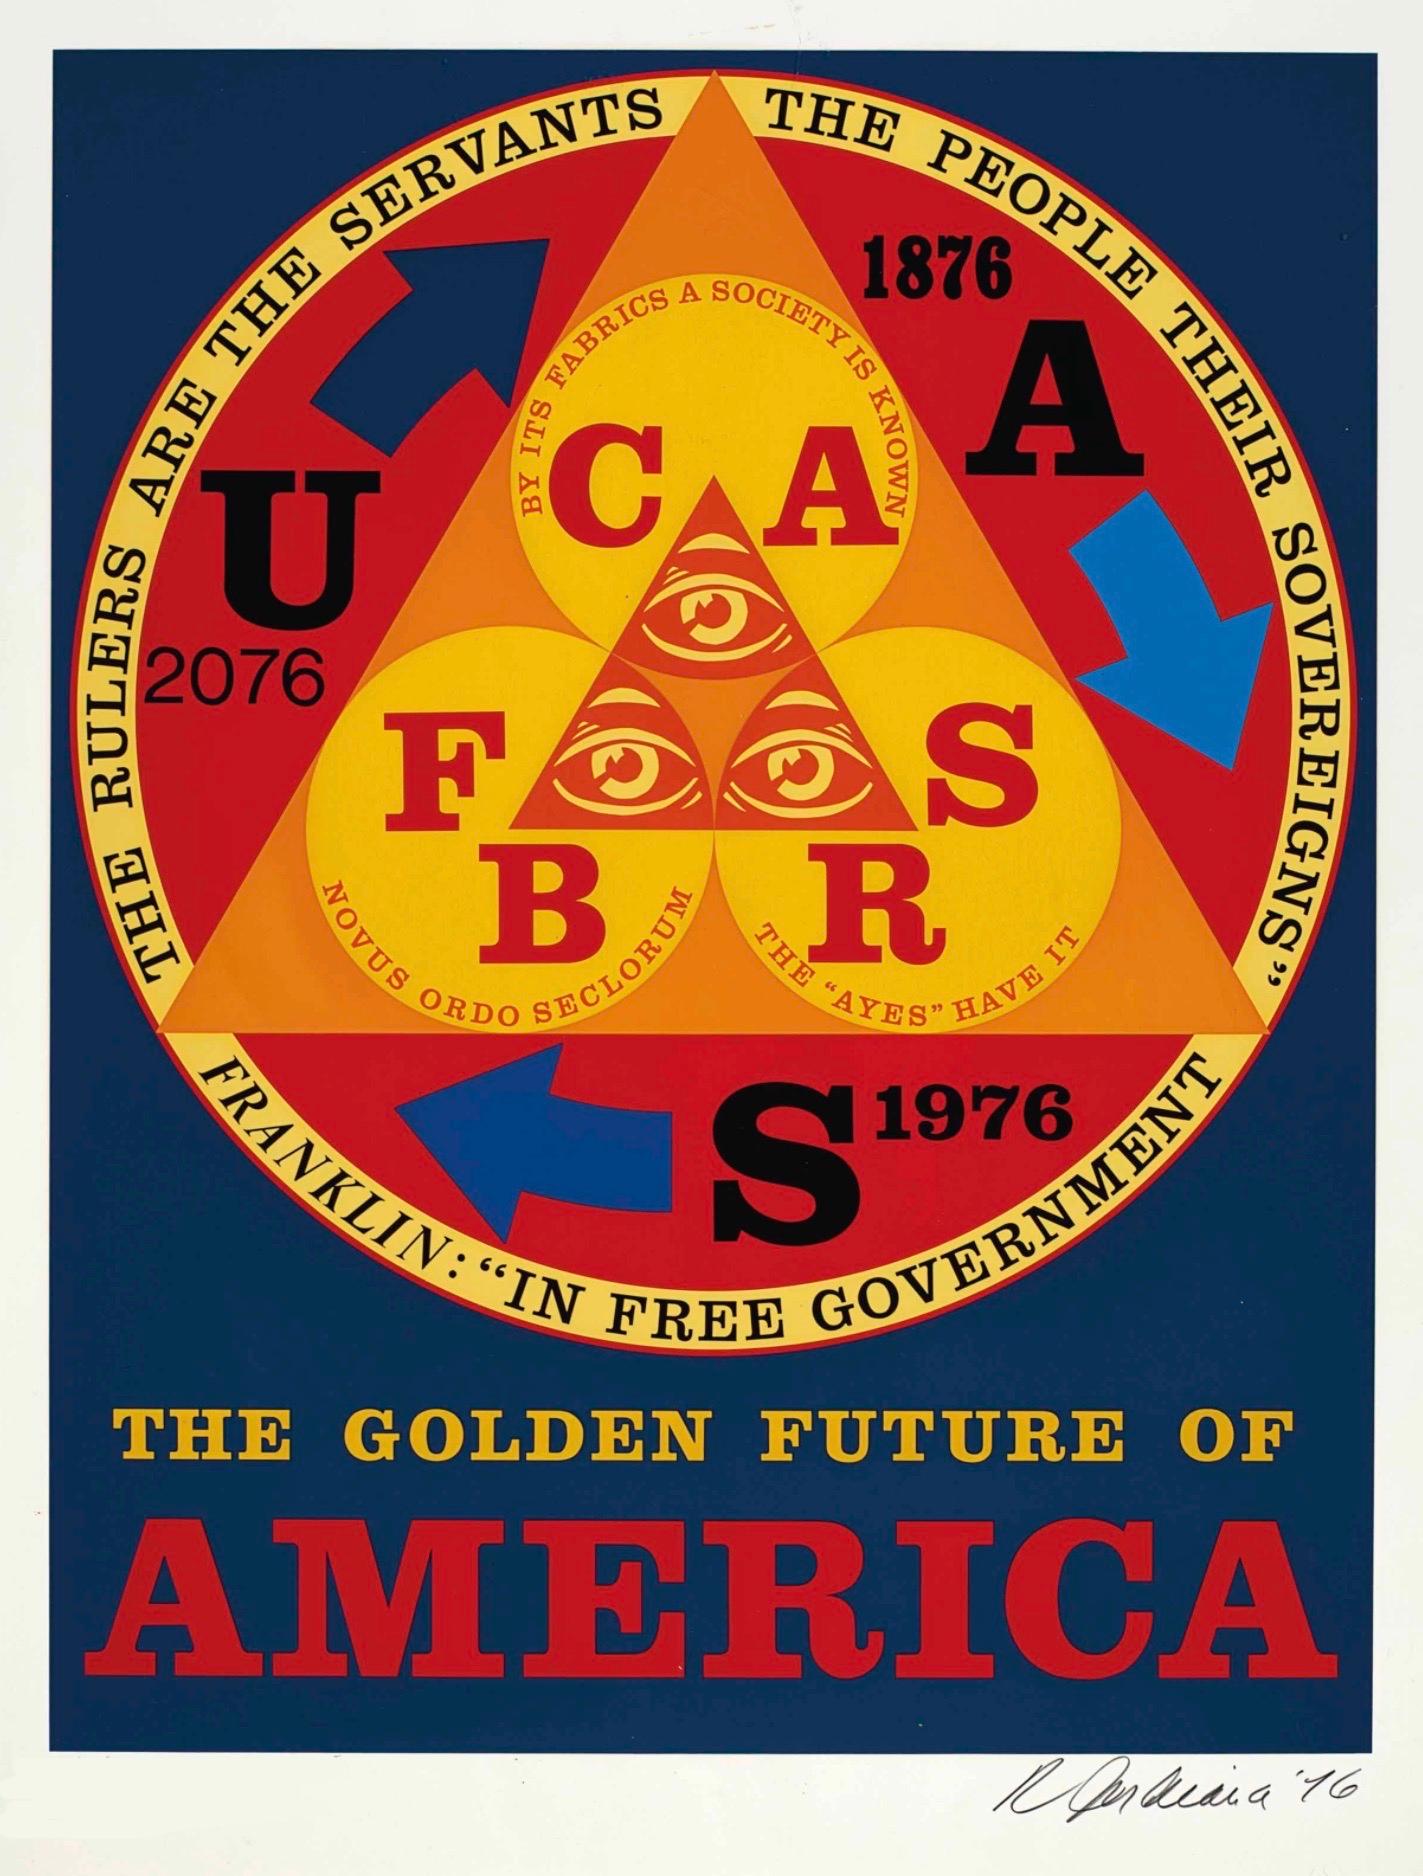 Golden age of the future - Print by Robert Indiana